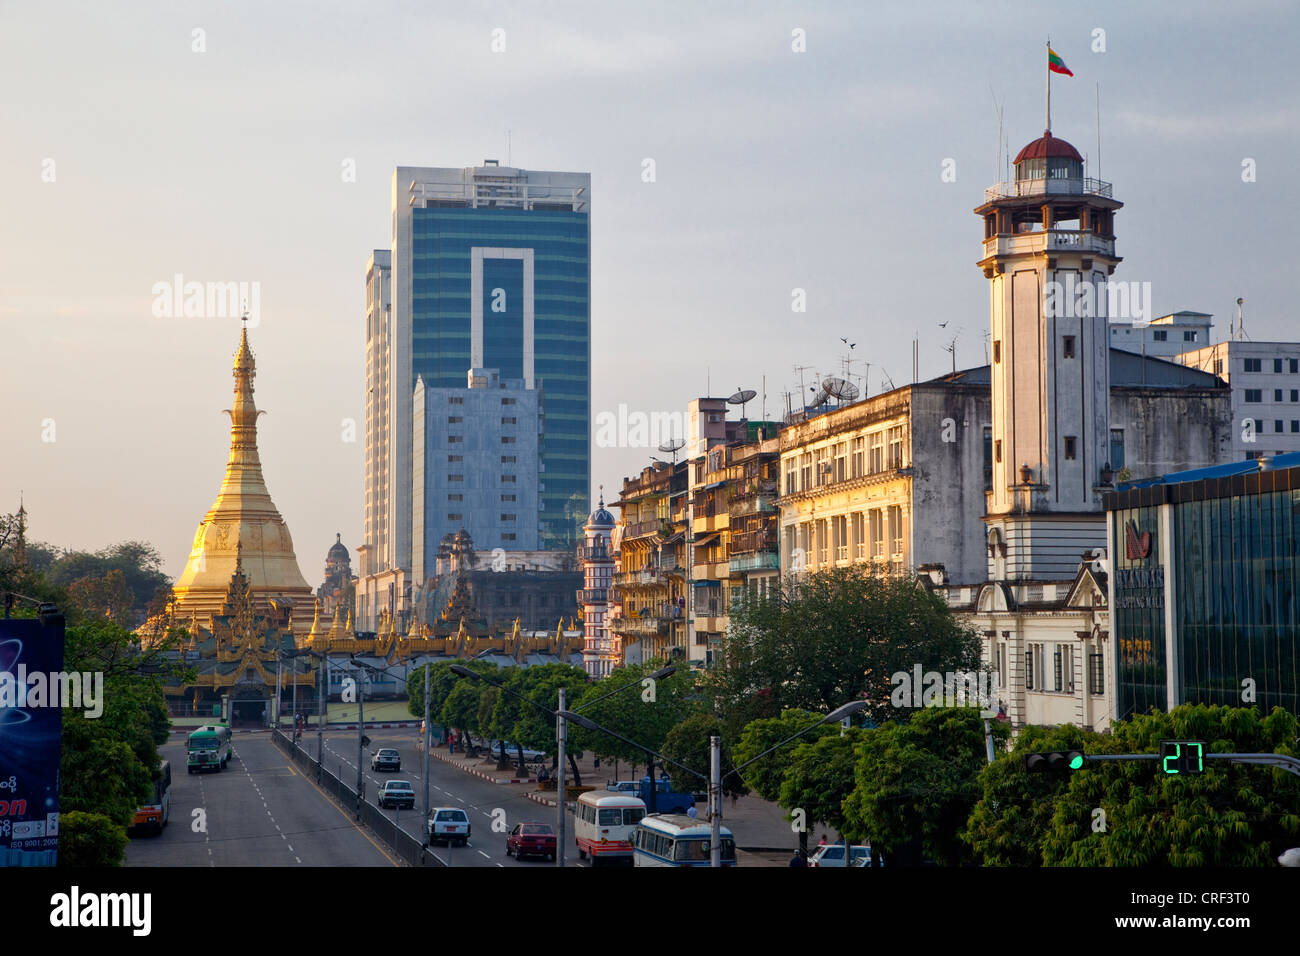 Myanmar, Burma, Yangon. Sule Pagoda Road, Early Morning.  Juxtaposition of Traditional and Modern Architectural Styles. Stock Photo